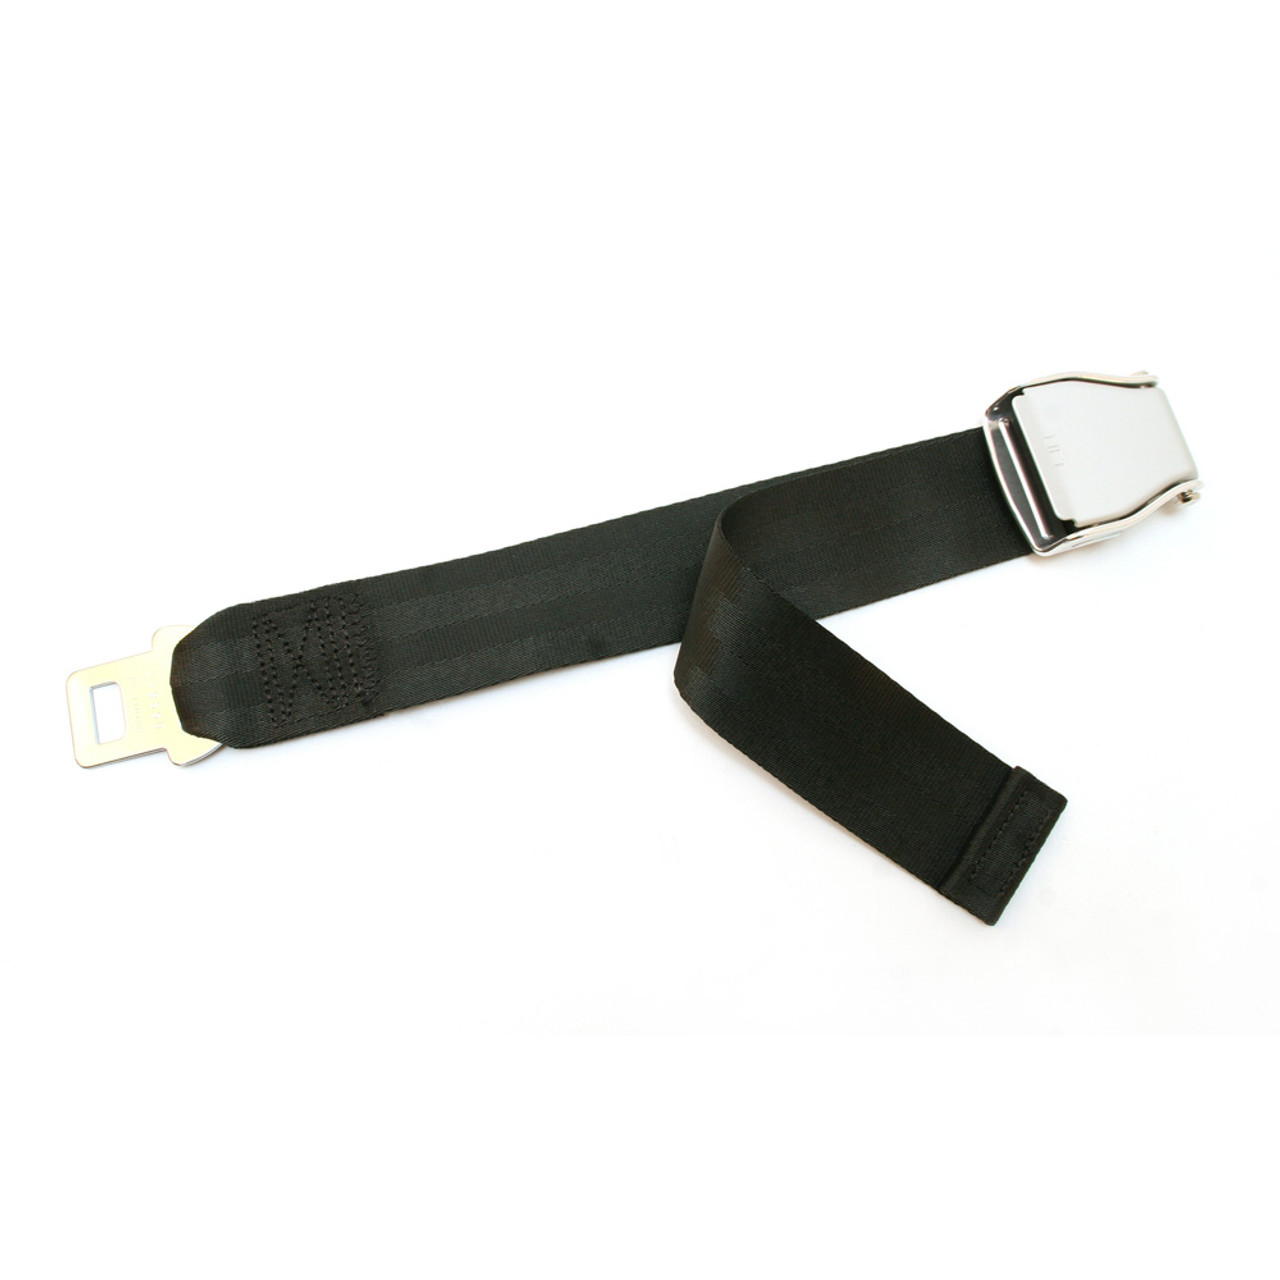 Airplane Seat Belt Extender - E8 Safety Certified